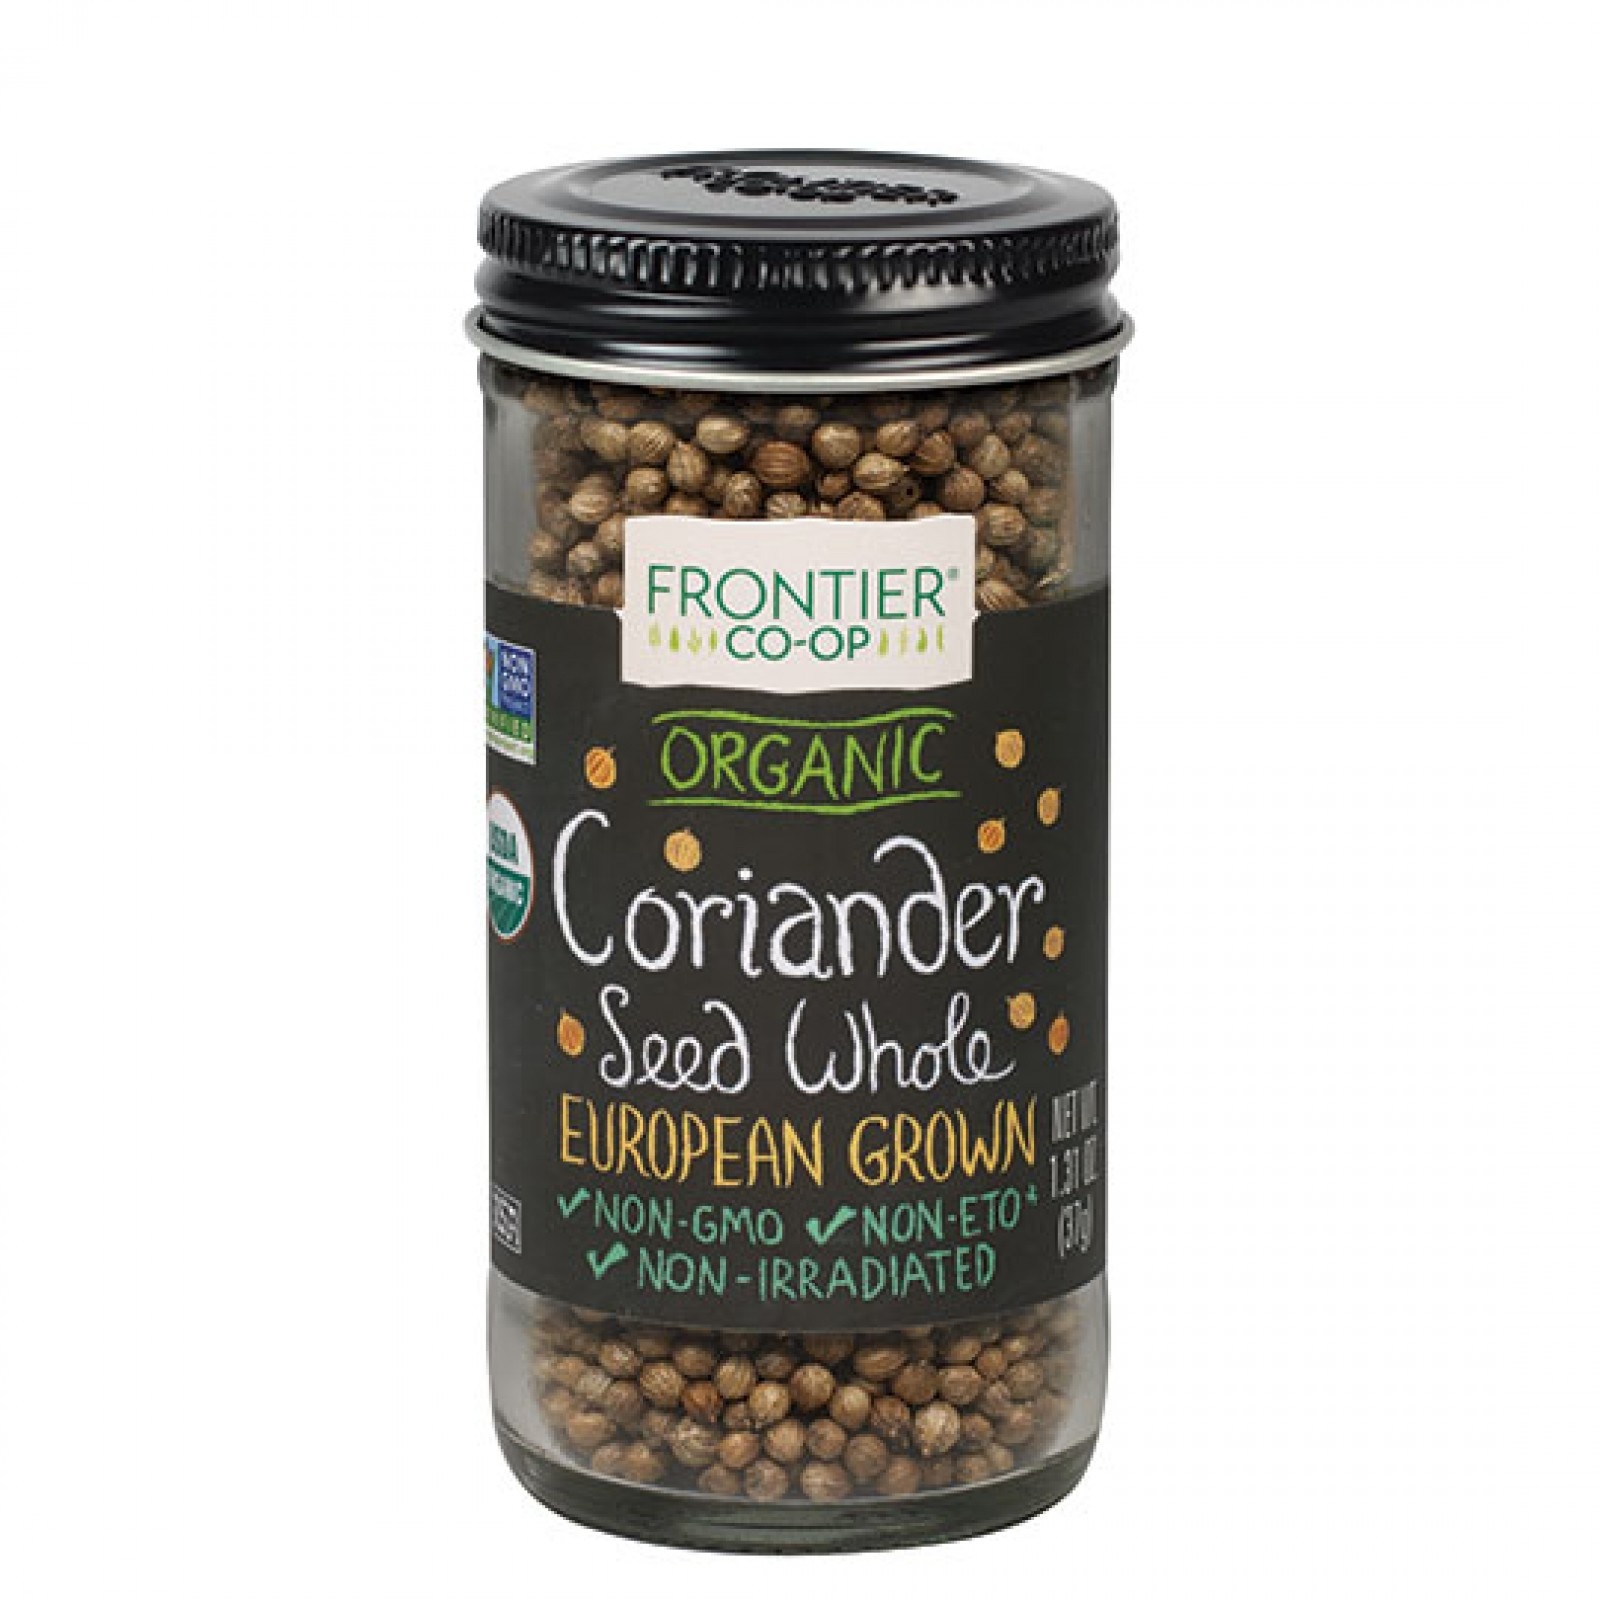 slide 1 of 1, Frontier Coriander Seed Whole Organic, 1.31 oz